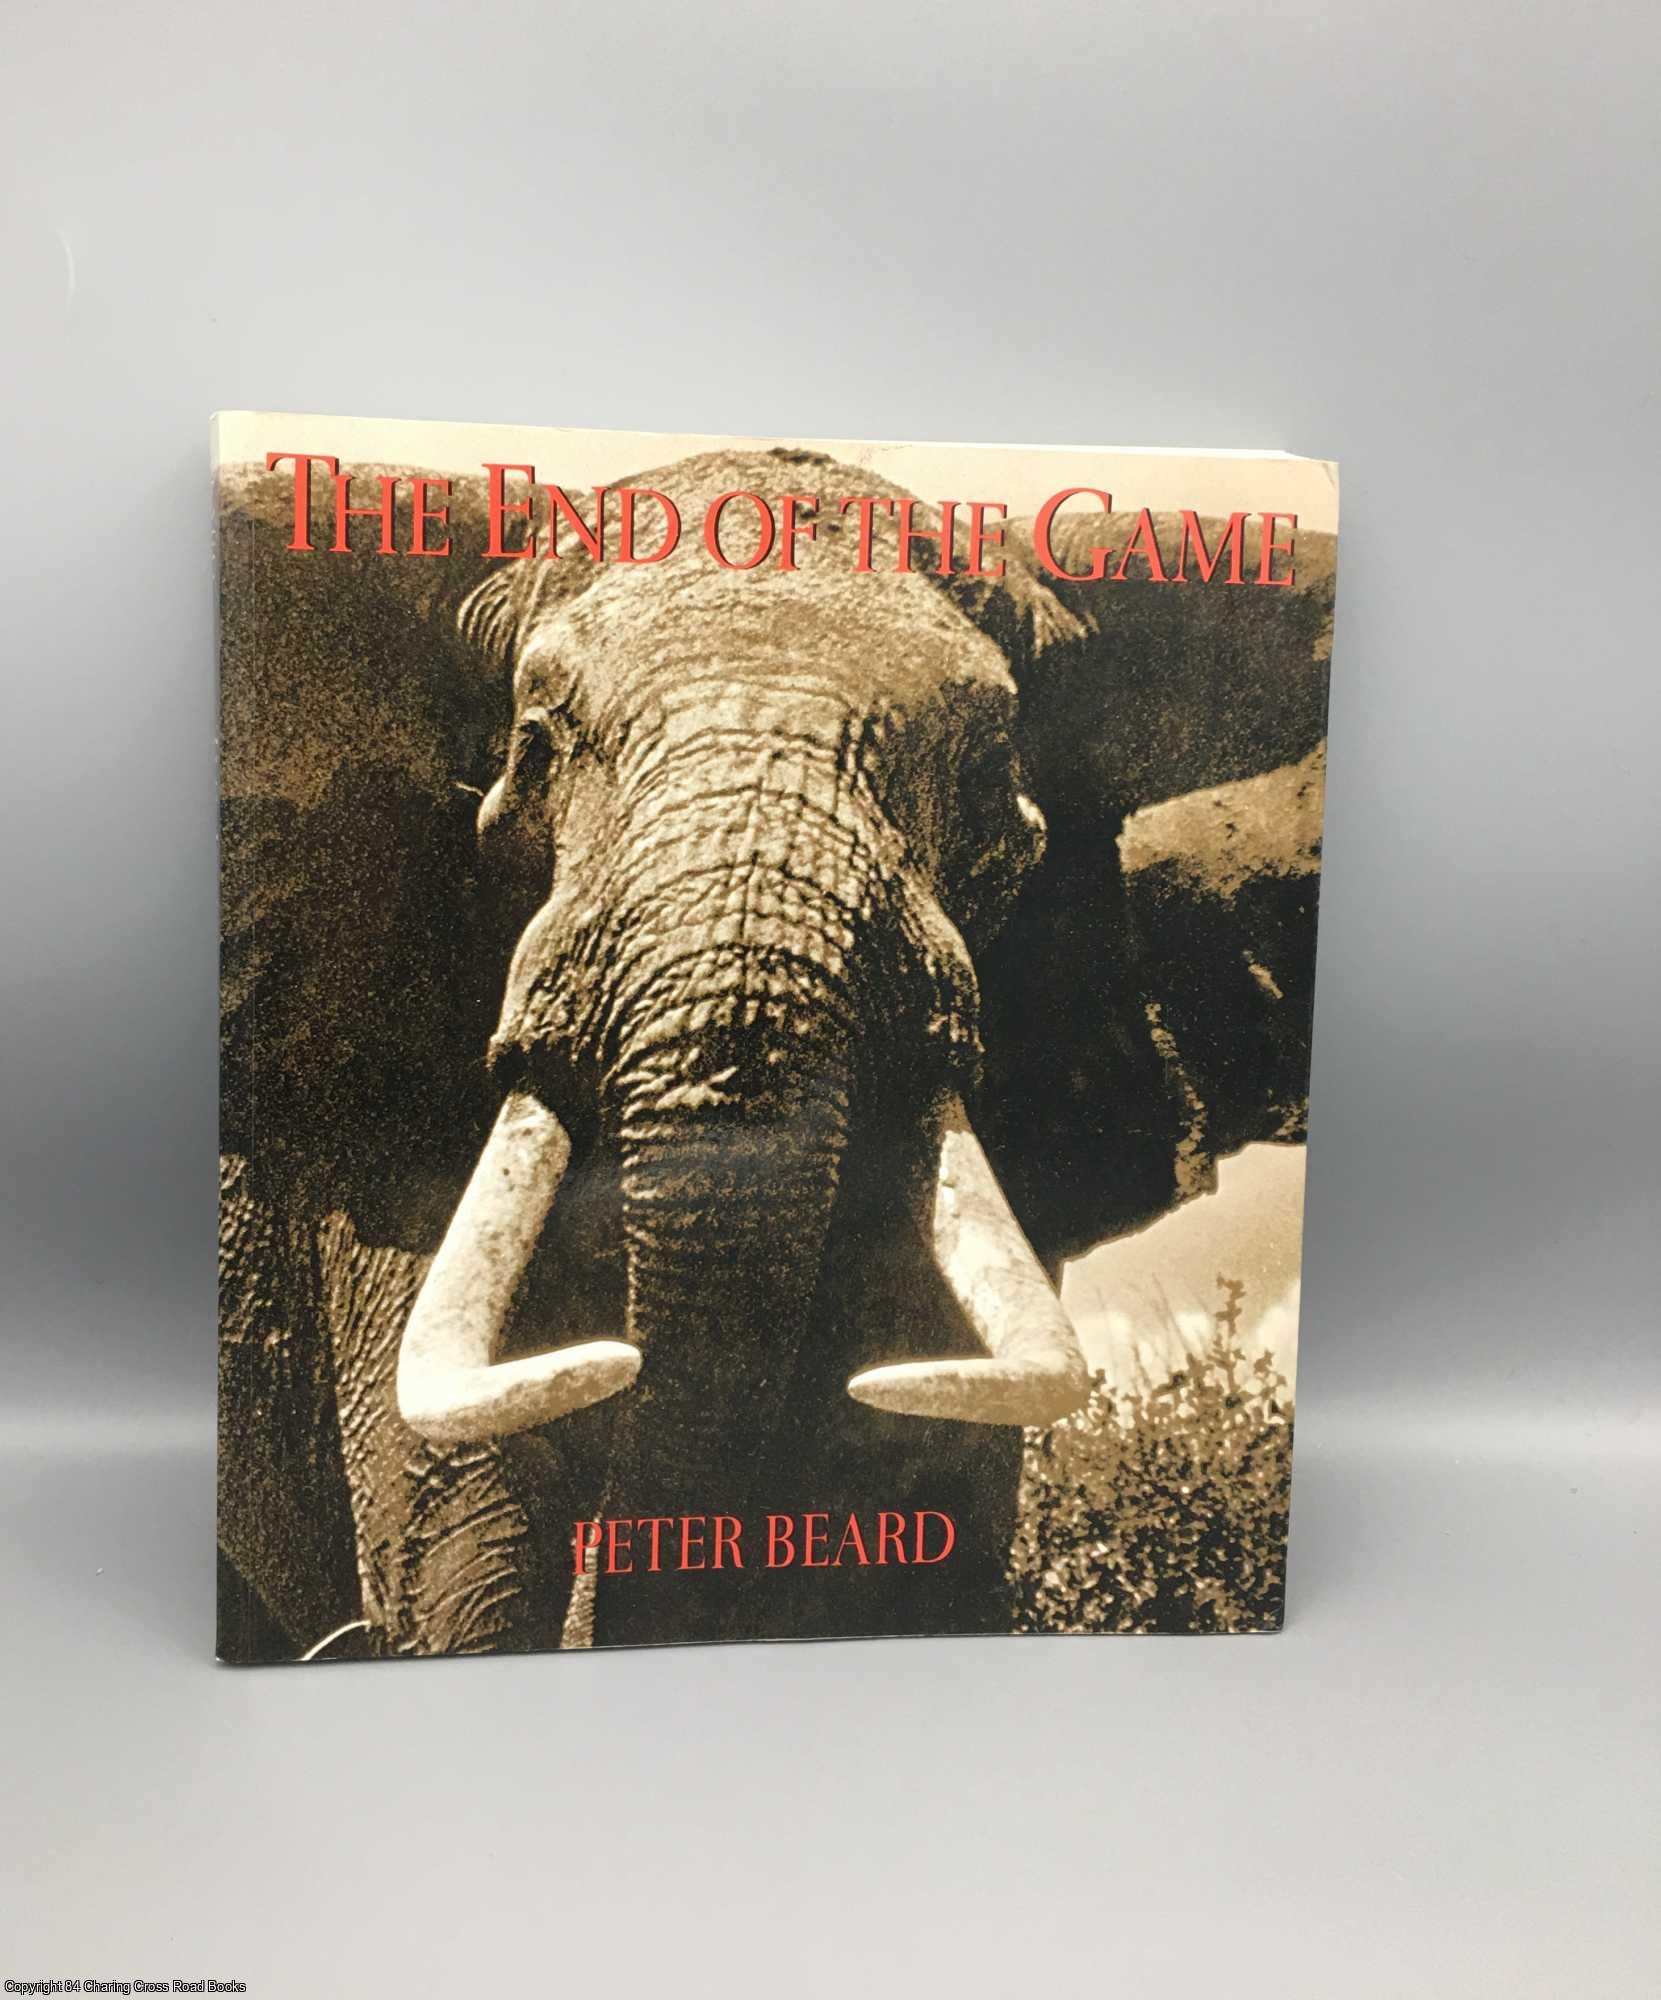 Peter Beard - The End of the Game: The Last Word from Paradise